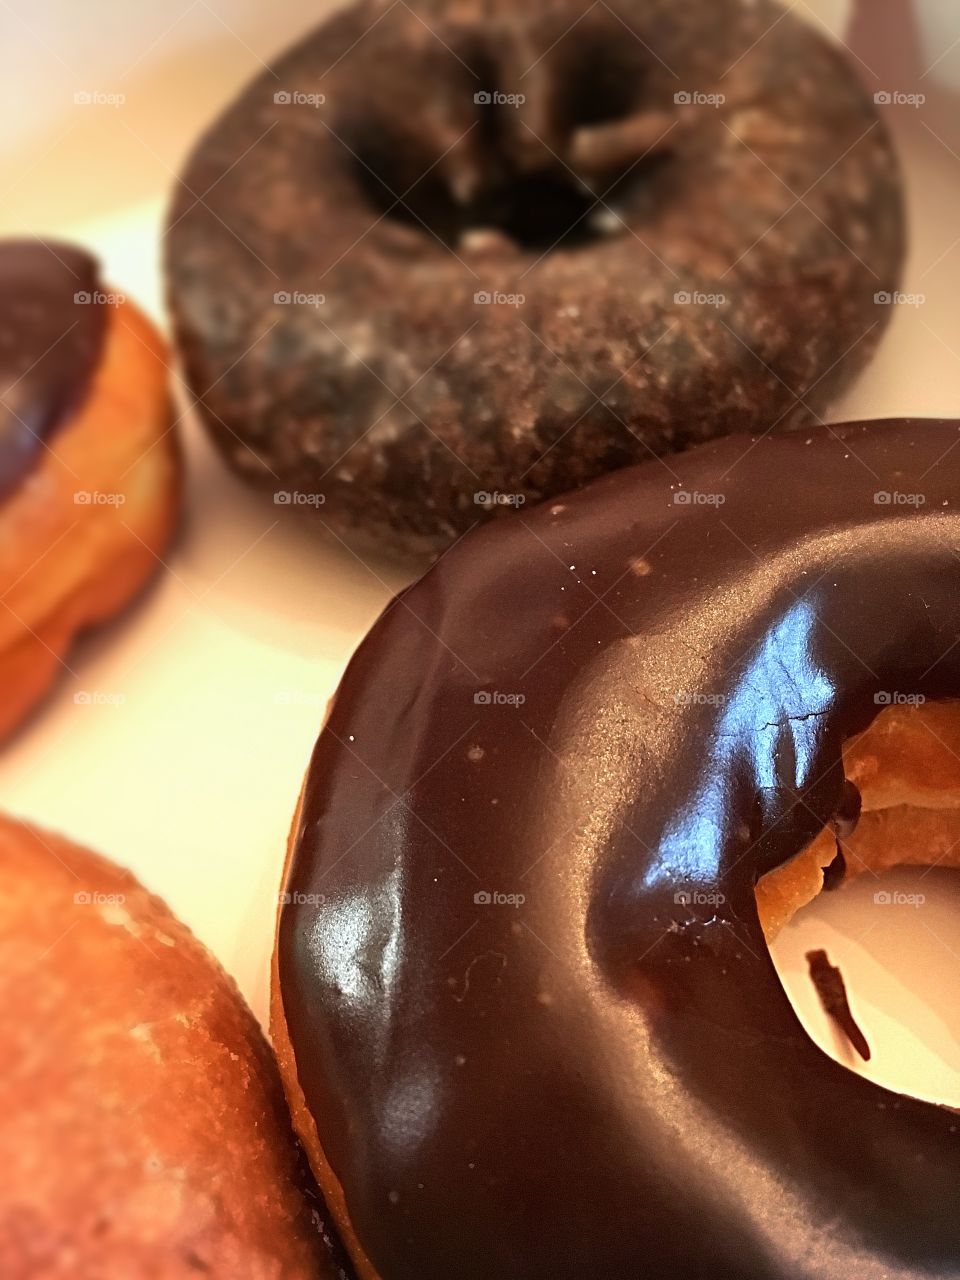 Focus on the foreground - box of donuts.  Chocolate, chocolate frosted, circular treats of deliciousness. 